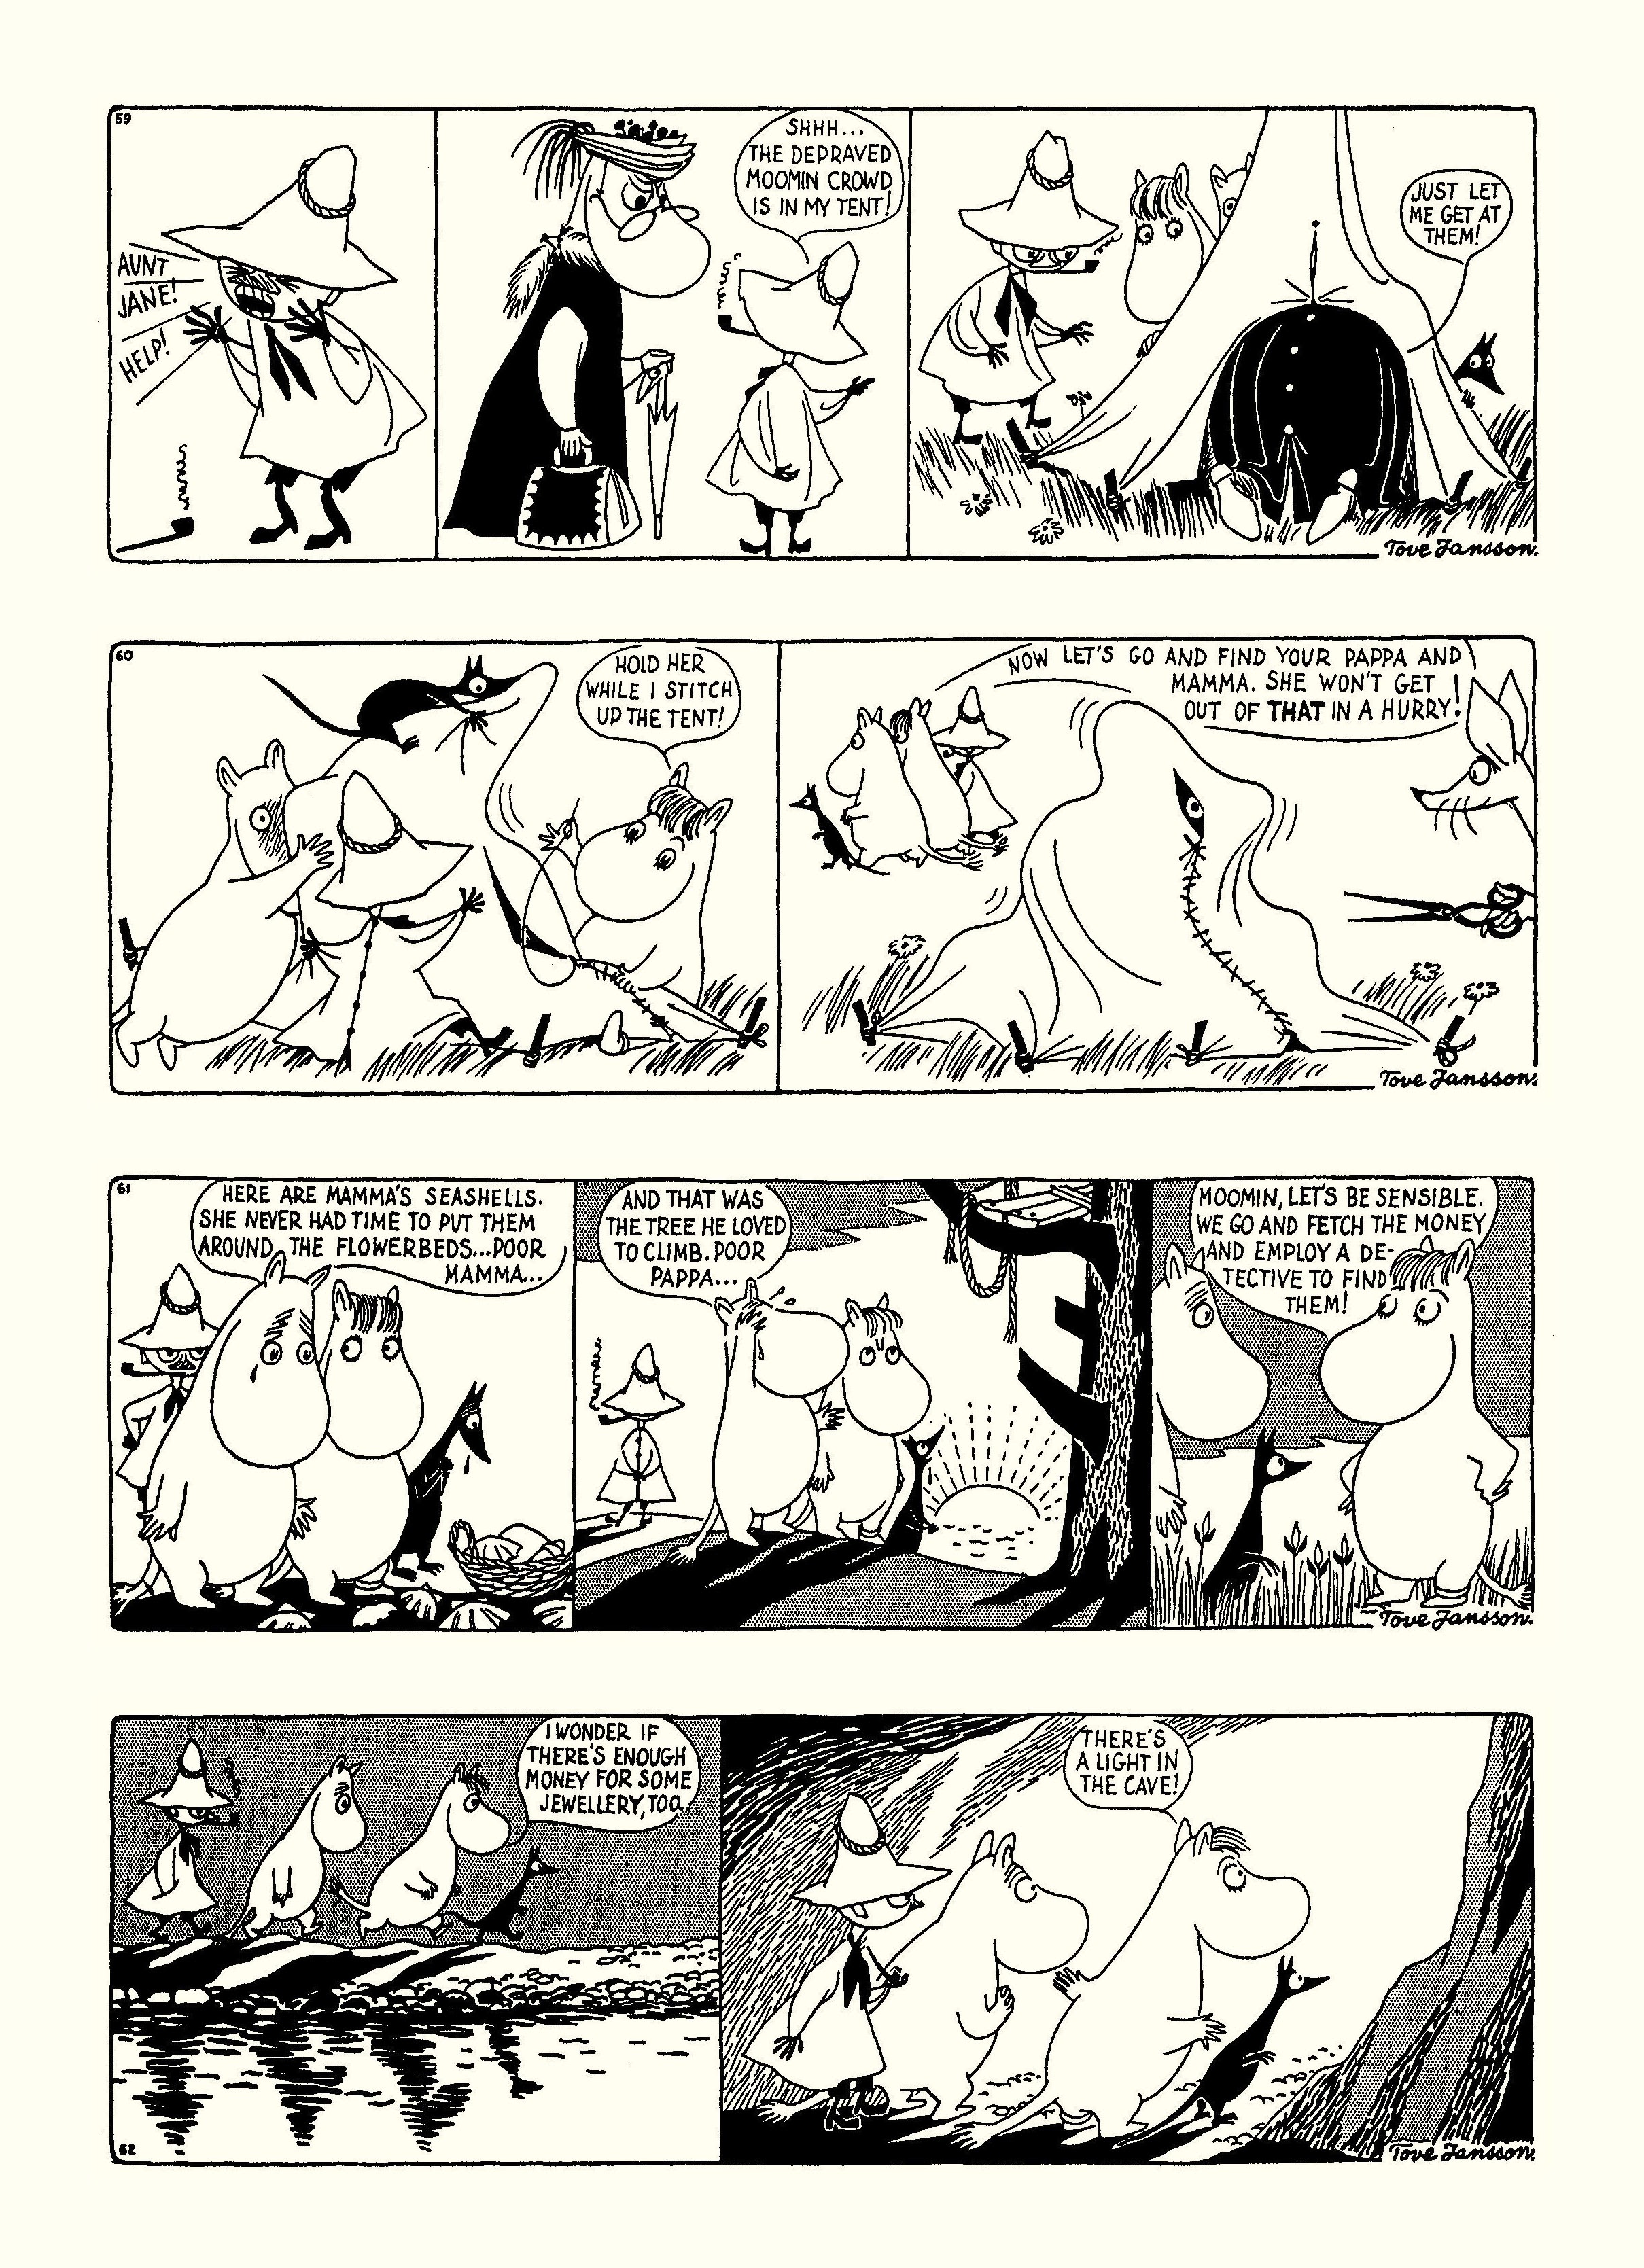 Read online Moomin: The Complete Tove Jansson Comic Strip comic -  Issue # TPB 1 - 45